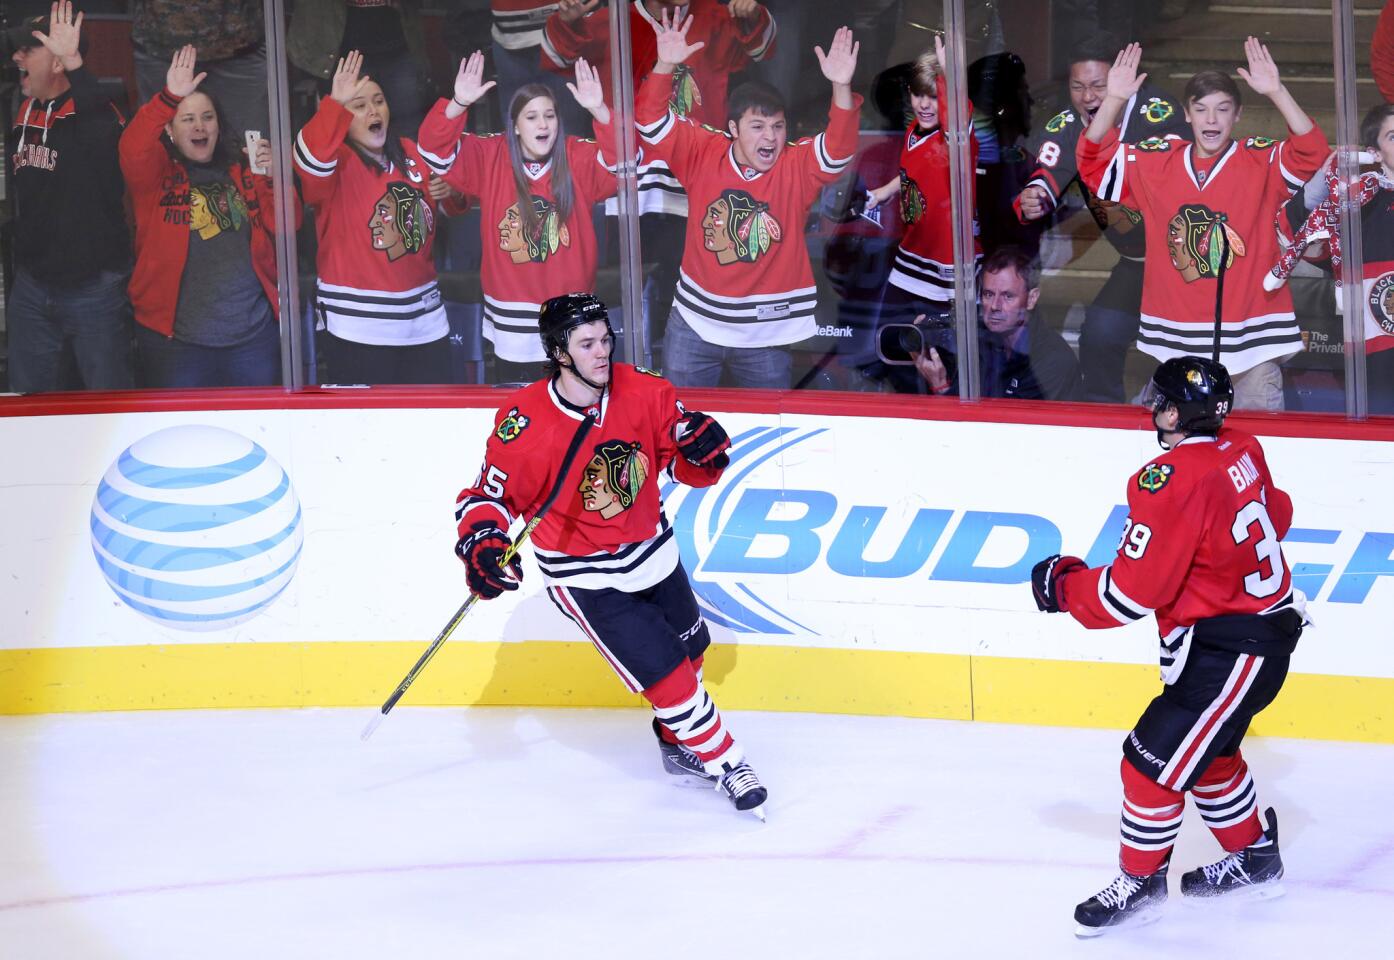 Blackhawks fans cheer after a goal by Andrew Shaw in the third period.